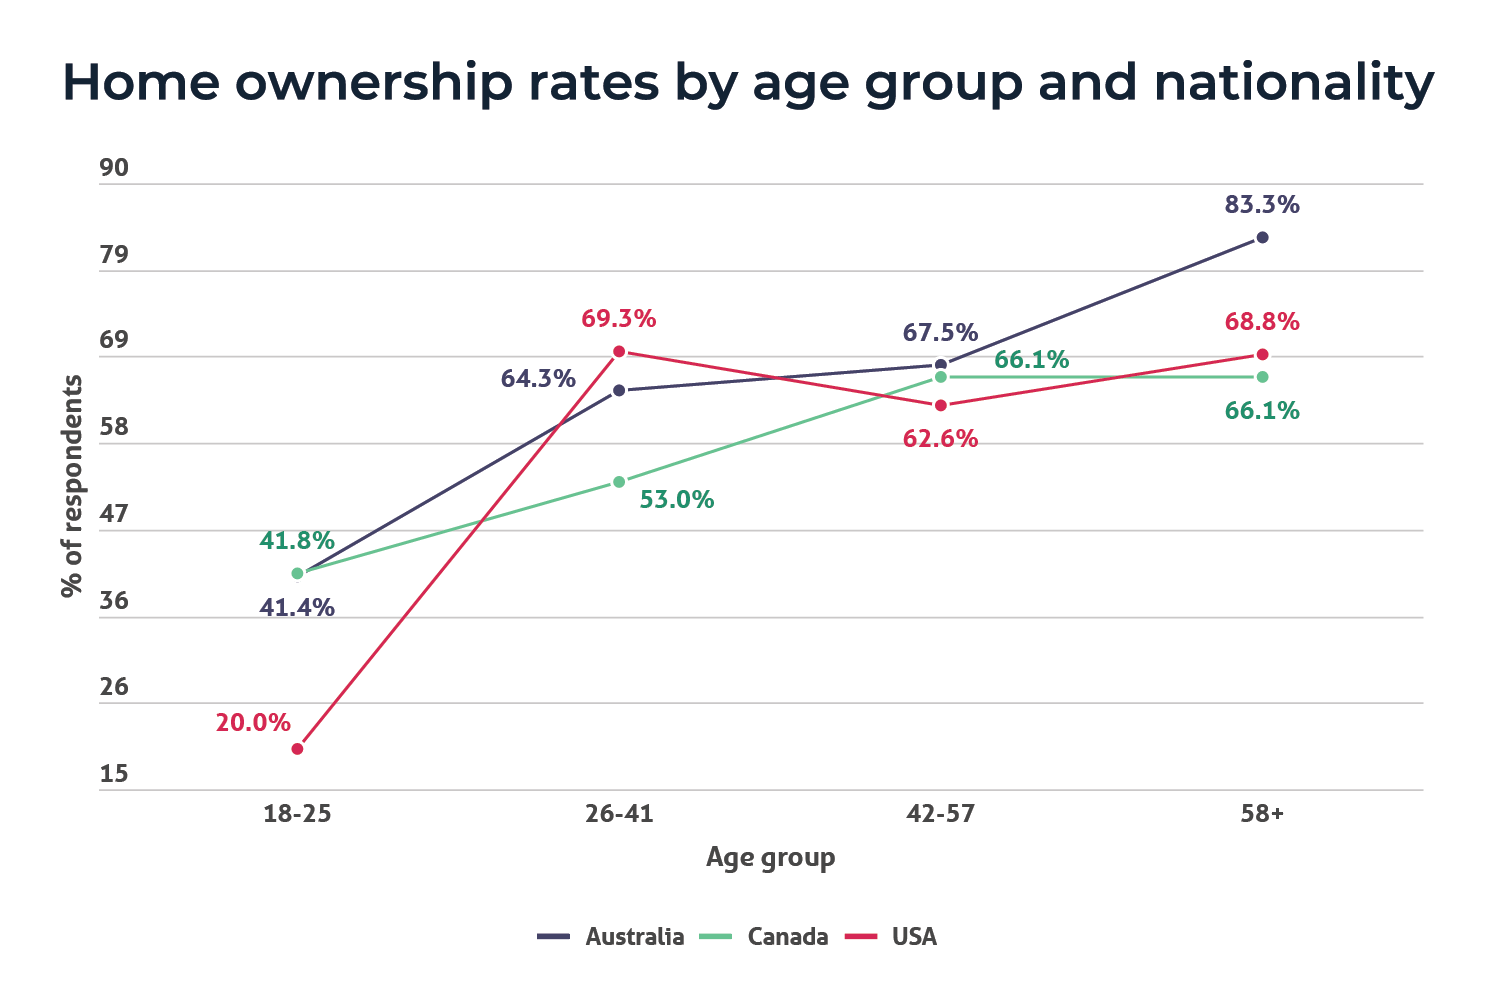 A line chart showing home ownership rates by age group for Australians, Canadians and Americans surveyed